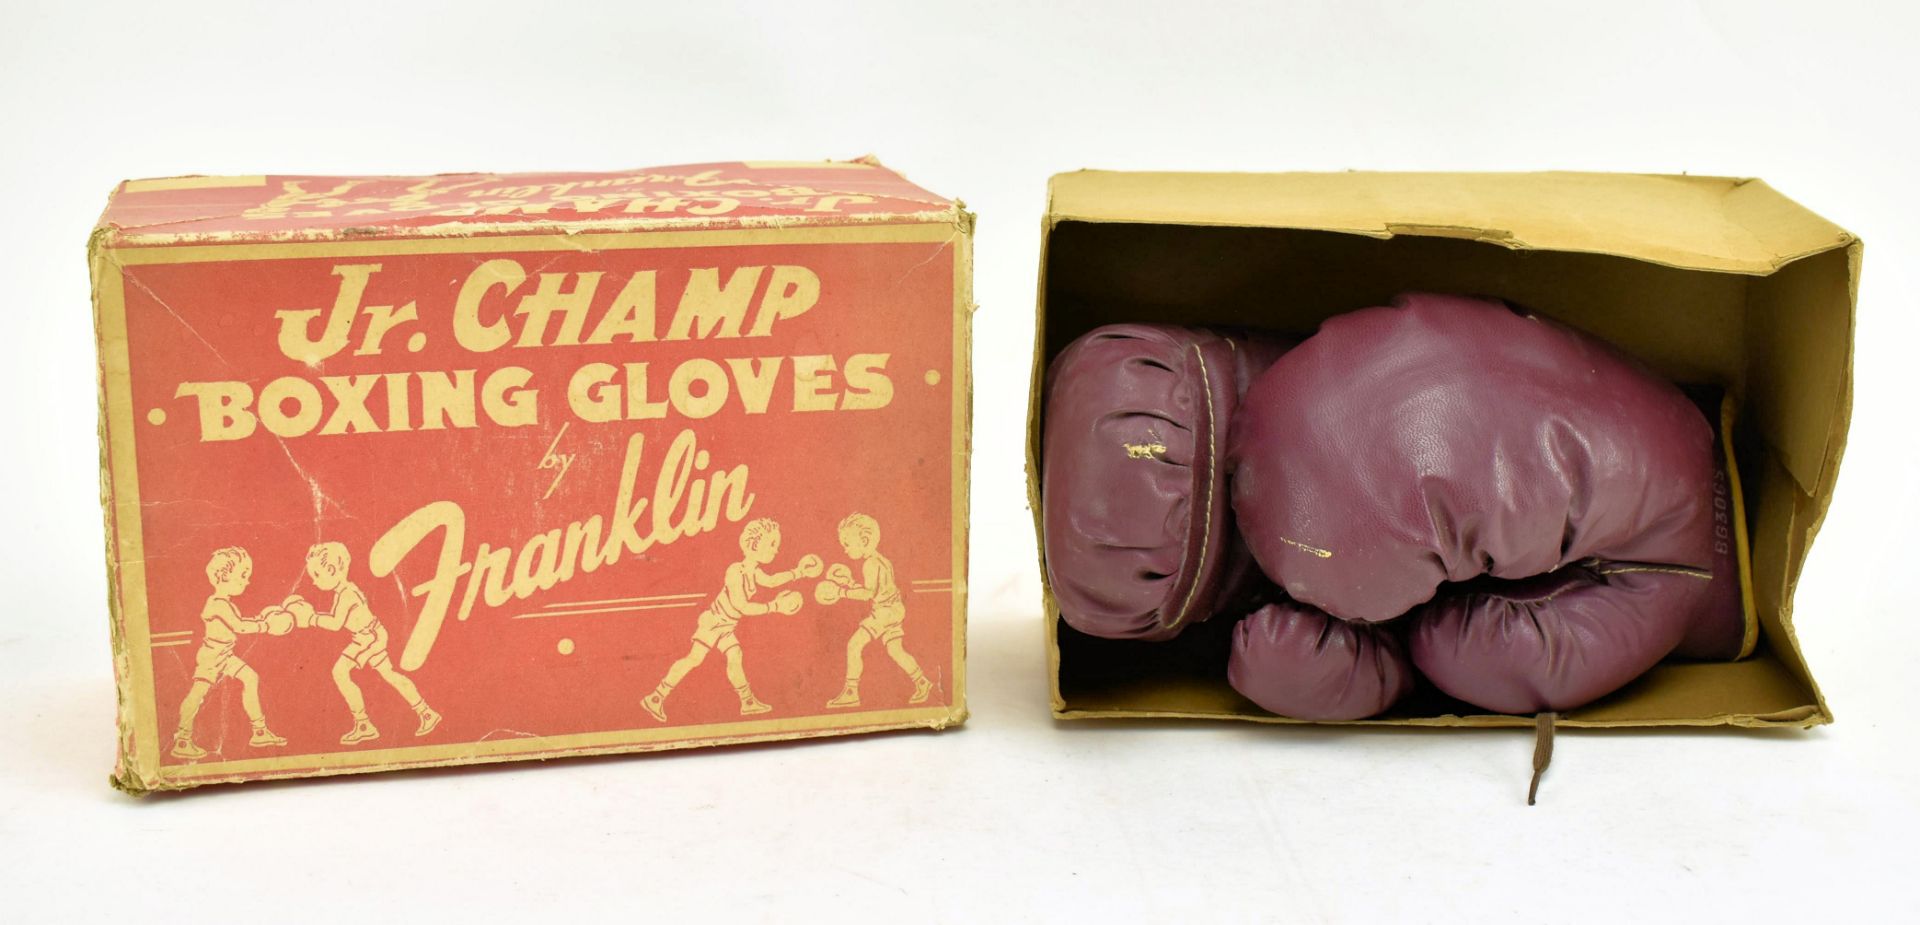 FRANKLIN - 1940S PAIR OF CHAMP BOXING GLOVES IN ORIGINAL BOX